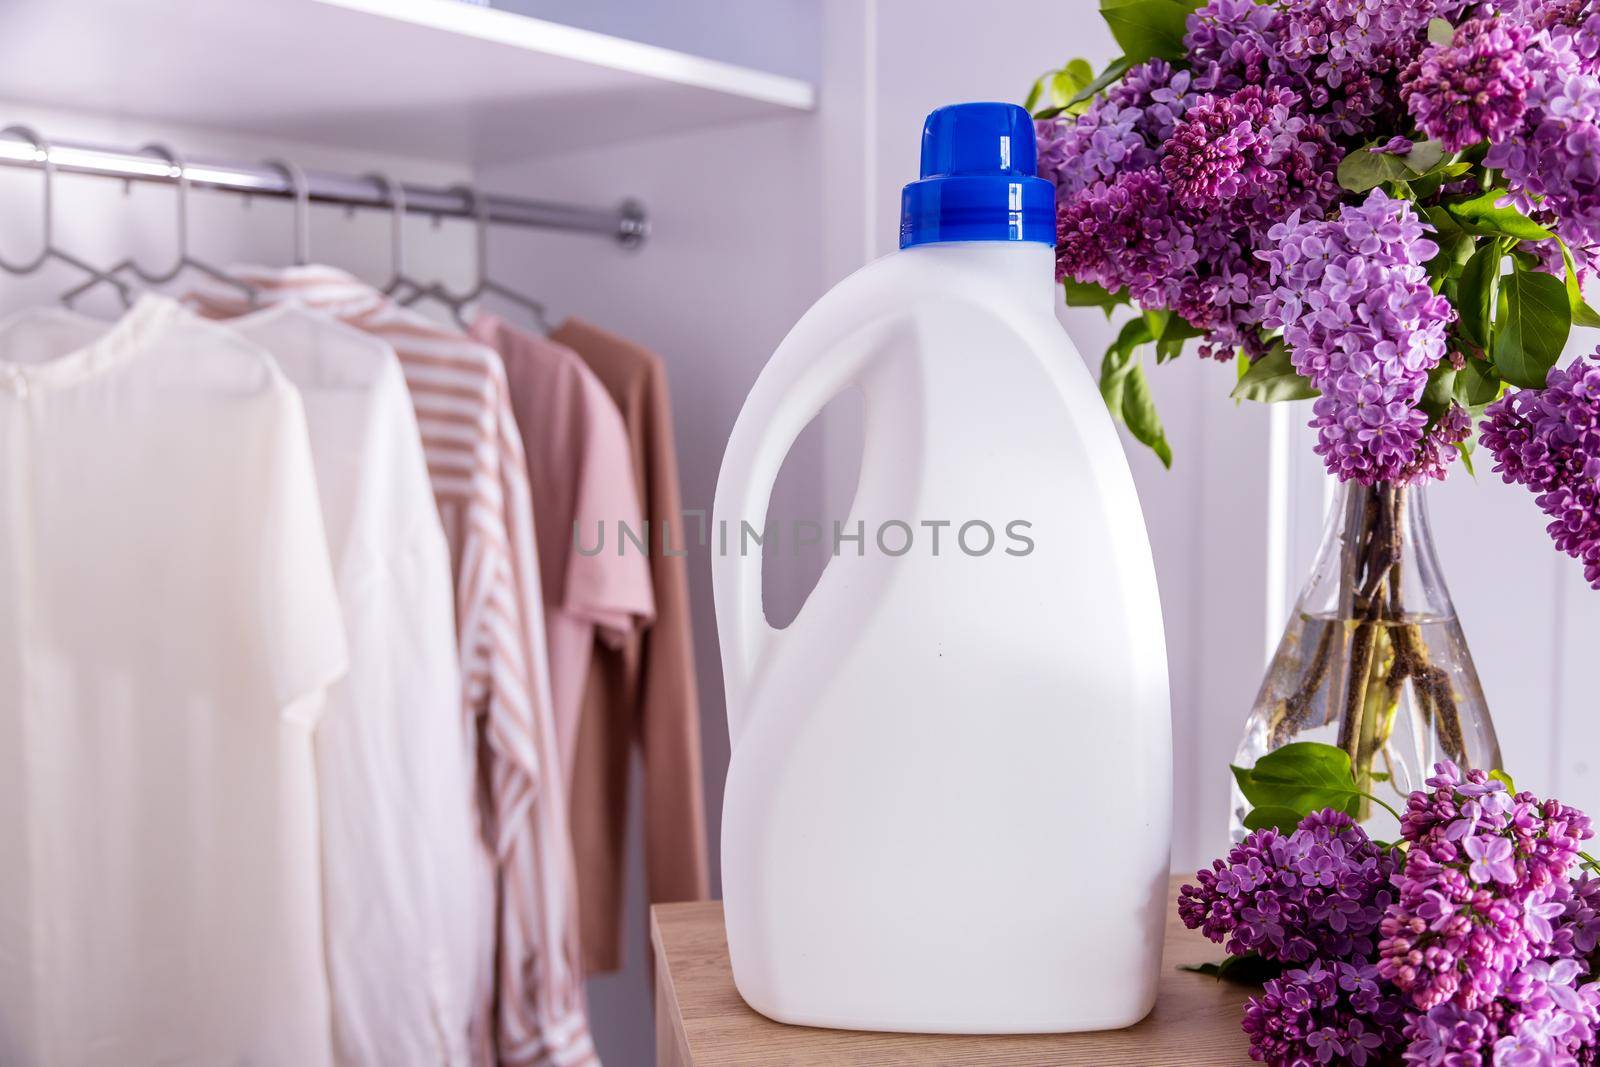 Eco design Mockup of empty bottles packaging laundry detergent against a closet with clothes in neutral tones. Place for text. Bio organic product. Nearby stands a bouquet of lilacs in a vase